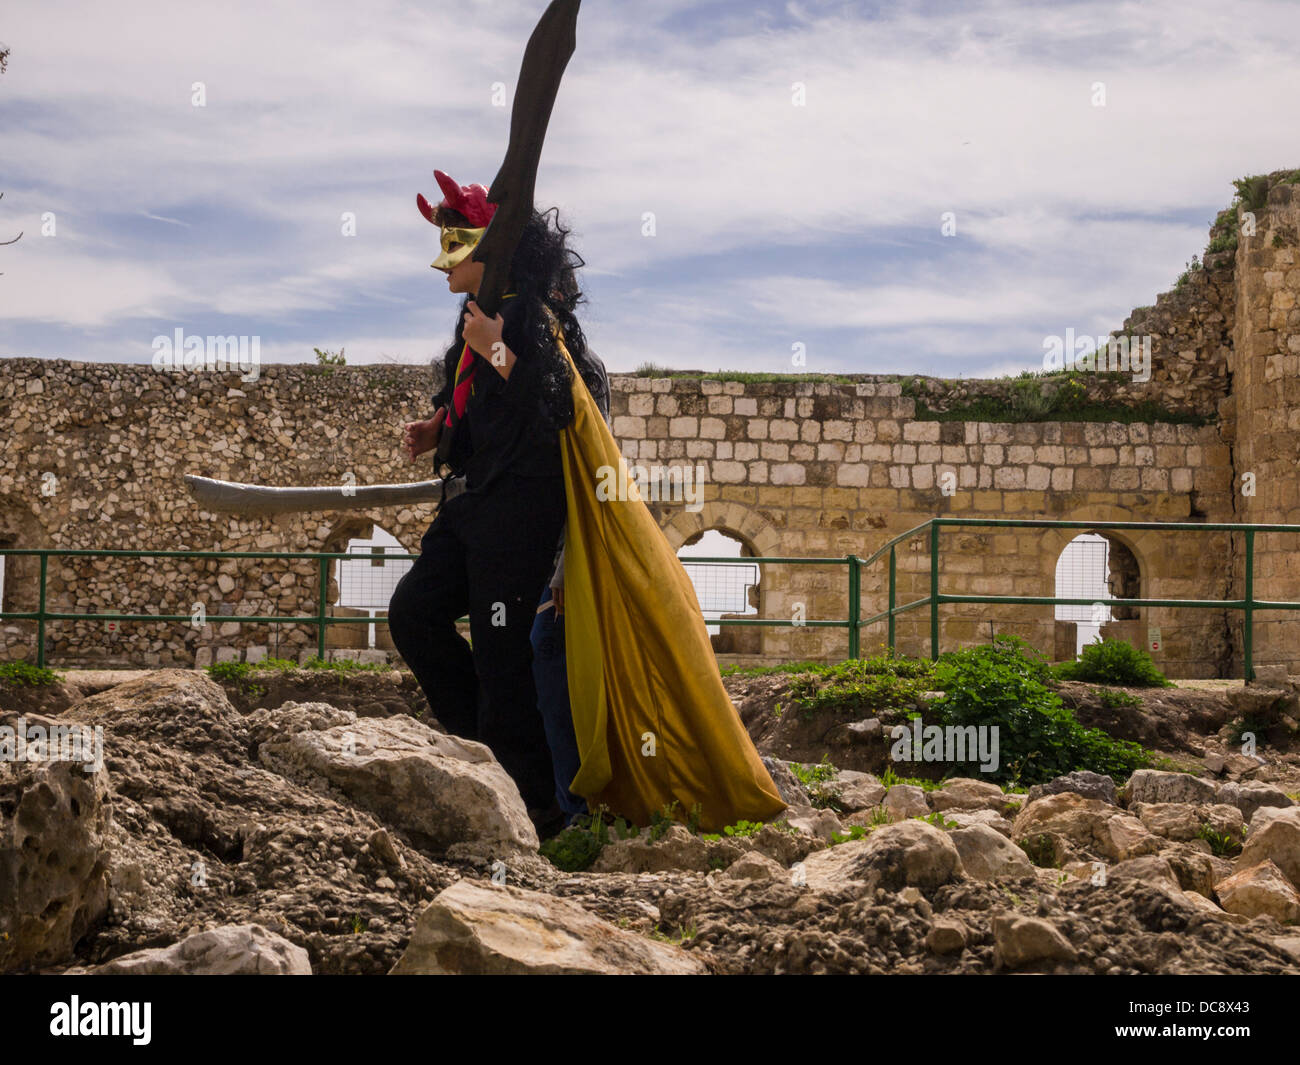 Rosh Haayin, Israel. A child with plastic swords and customs play medieval games at the ruins of a 16th century ottoman fort. Stock Photo